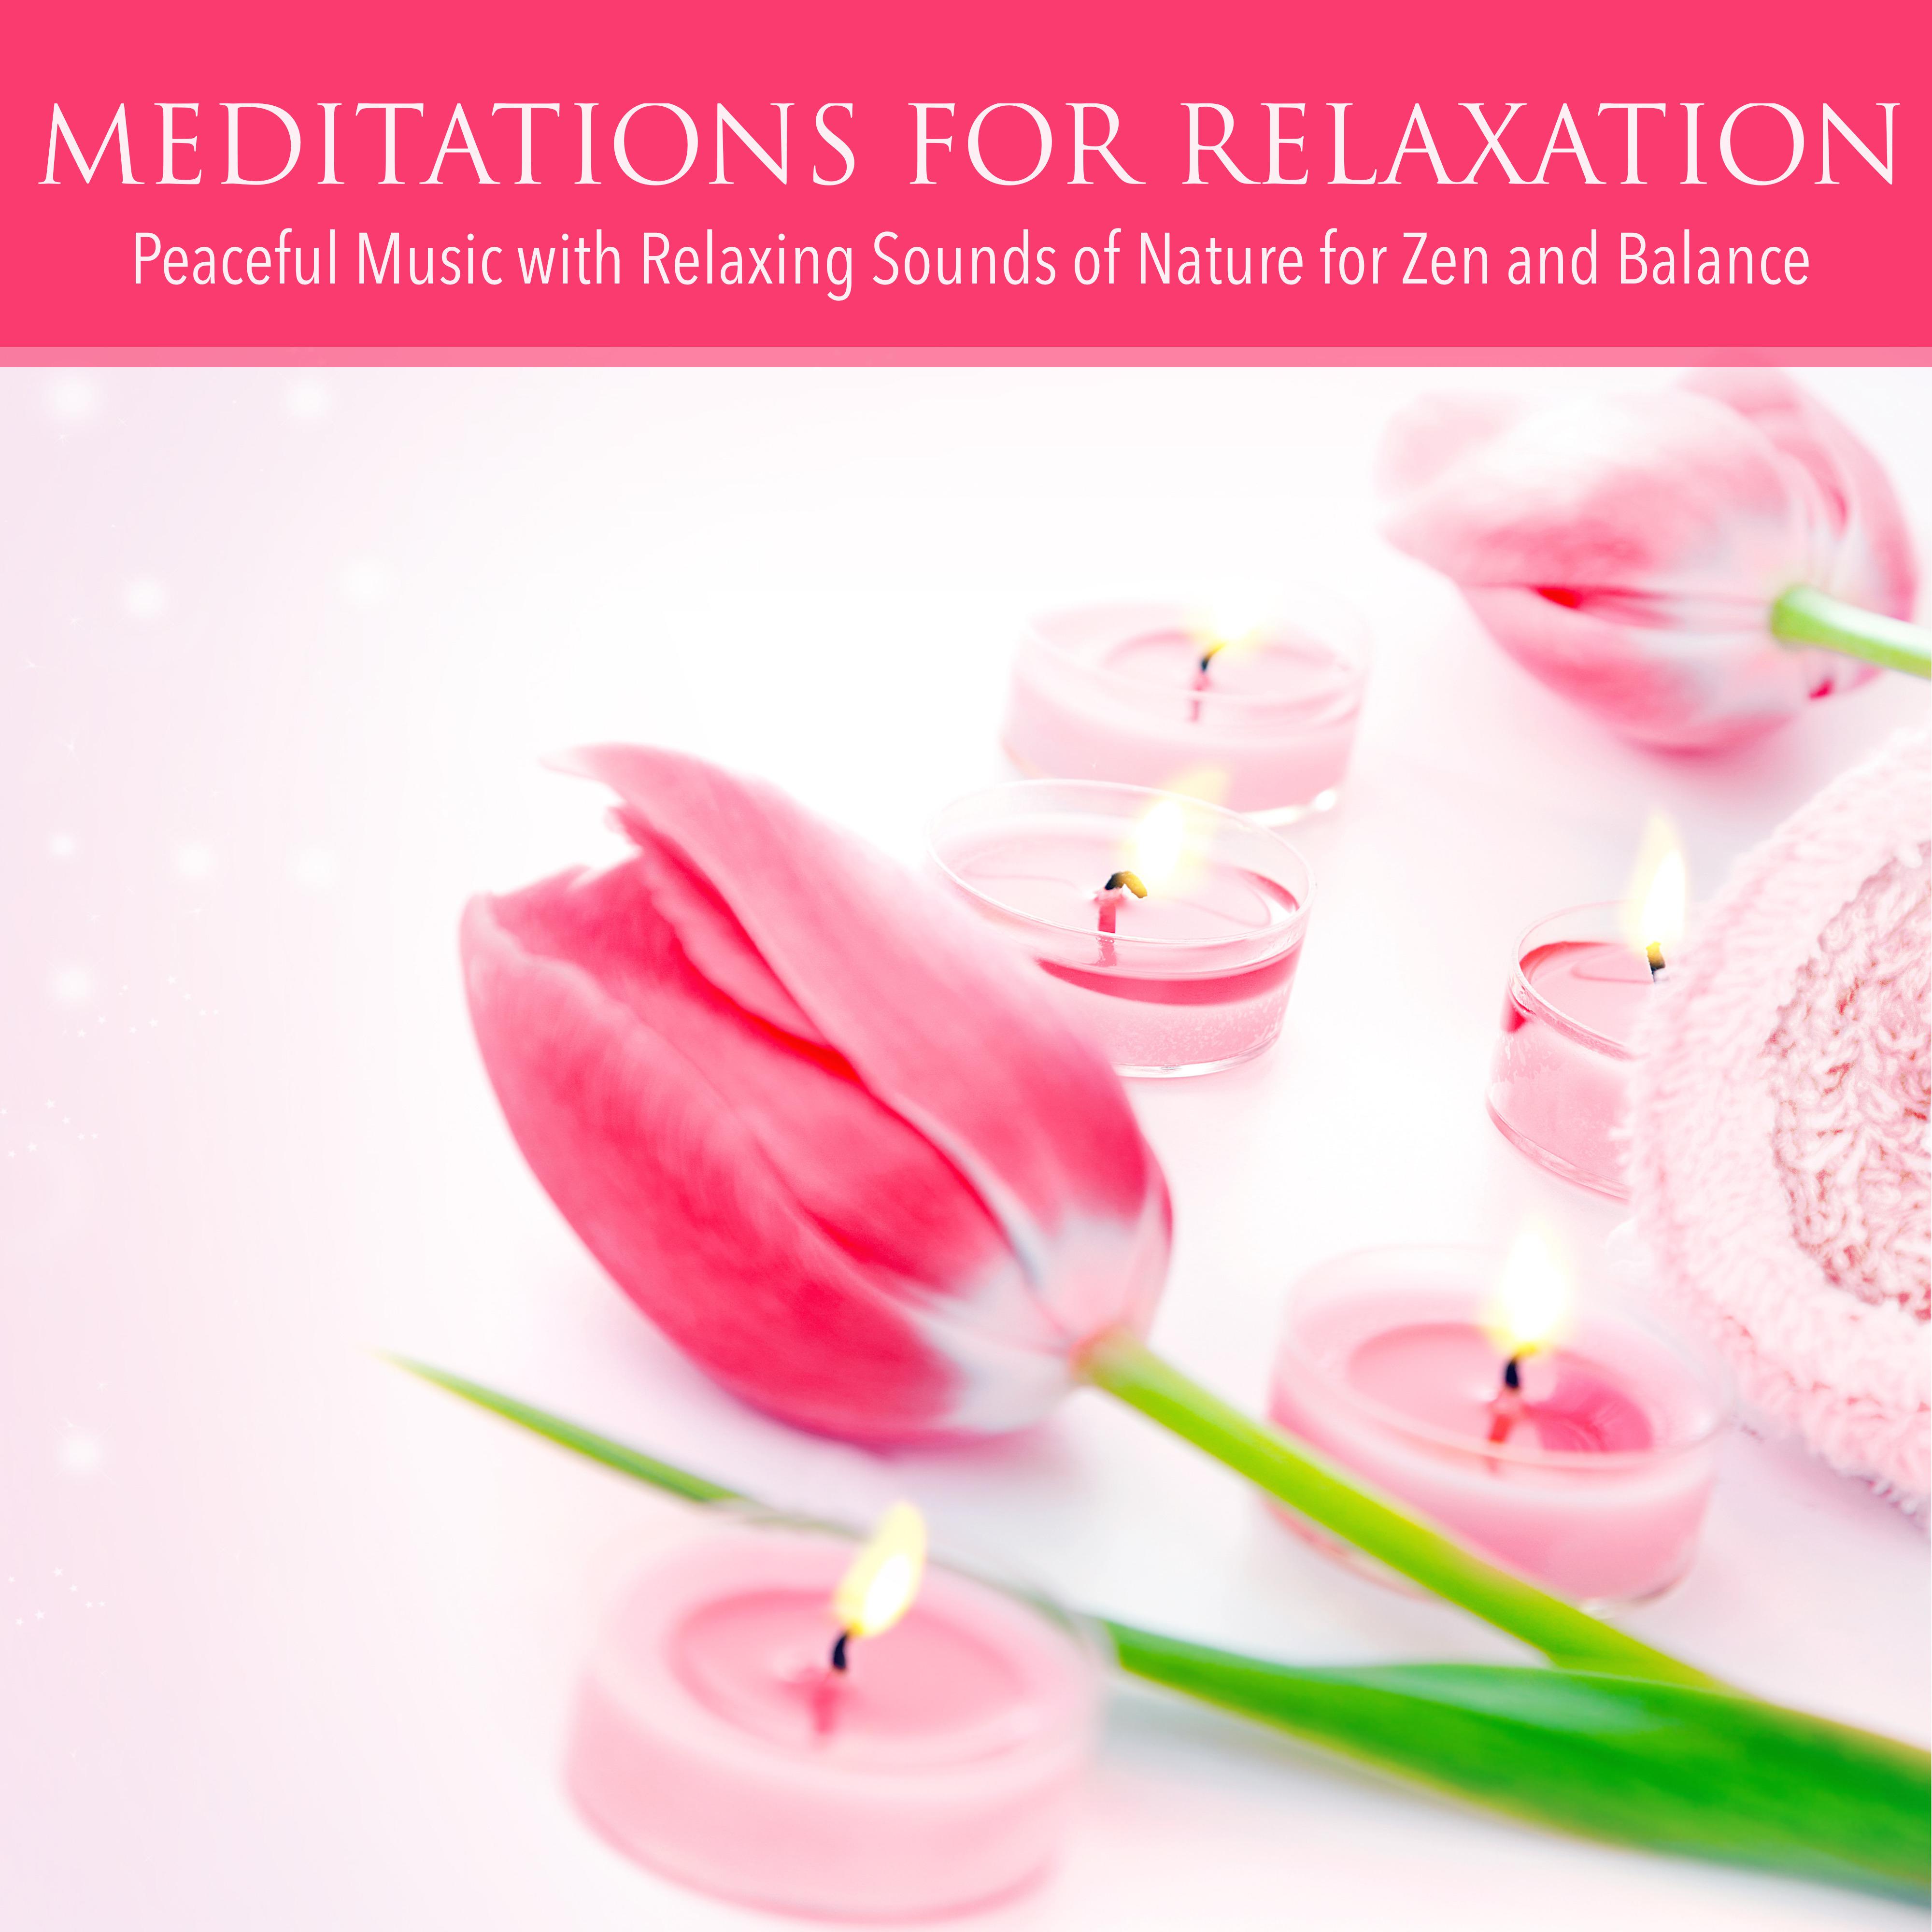 Meditations for Relaxation - Peaceful Music with Relaxing Sounds of Nature for Zen and Balance, Soothing Music for Healthy Living and Asian Meditation